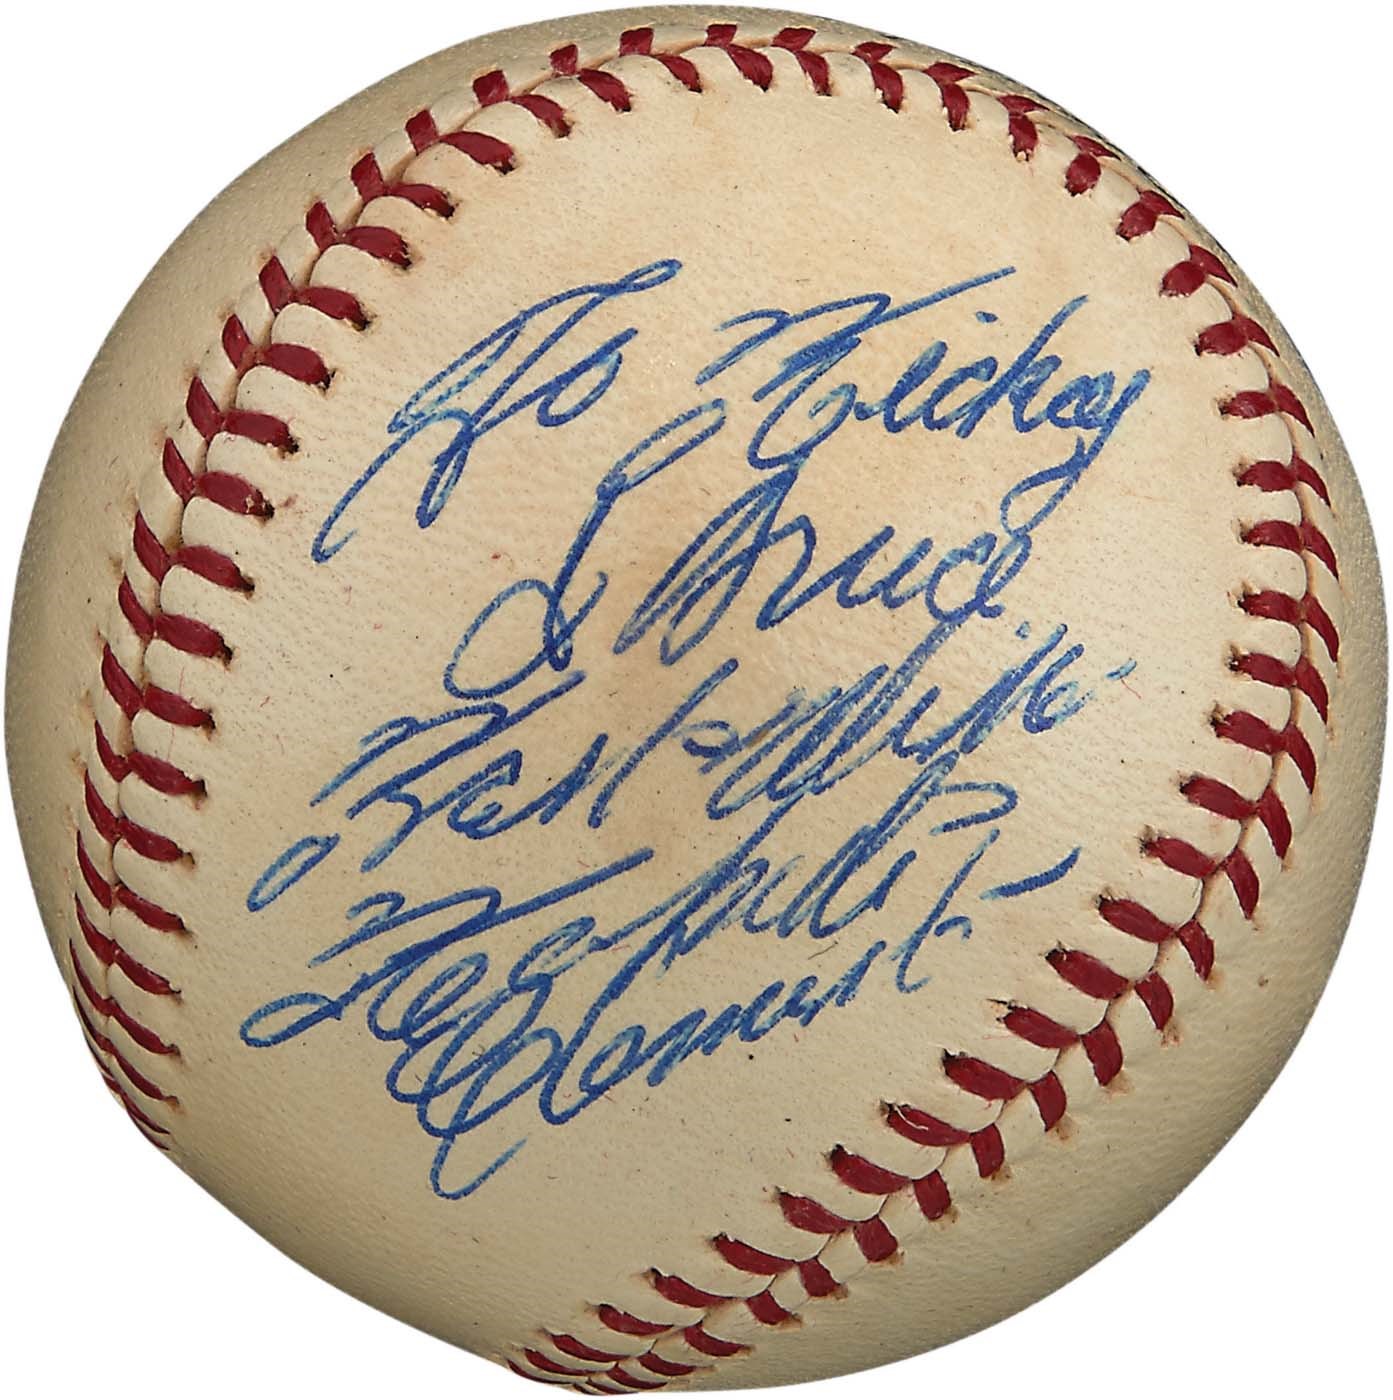 - 1960s Roberto Clemente Single-Signed Baseball with Perfect "10" Autograph (Overall PSA Mint 9)